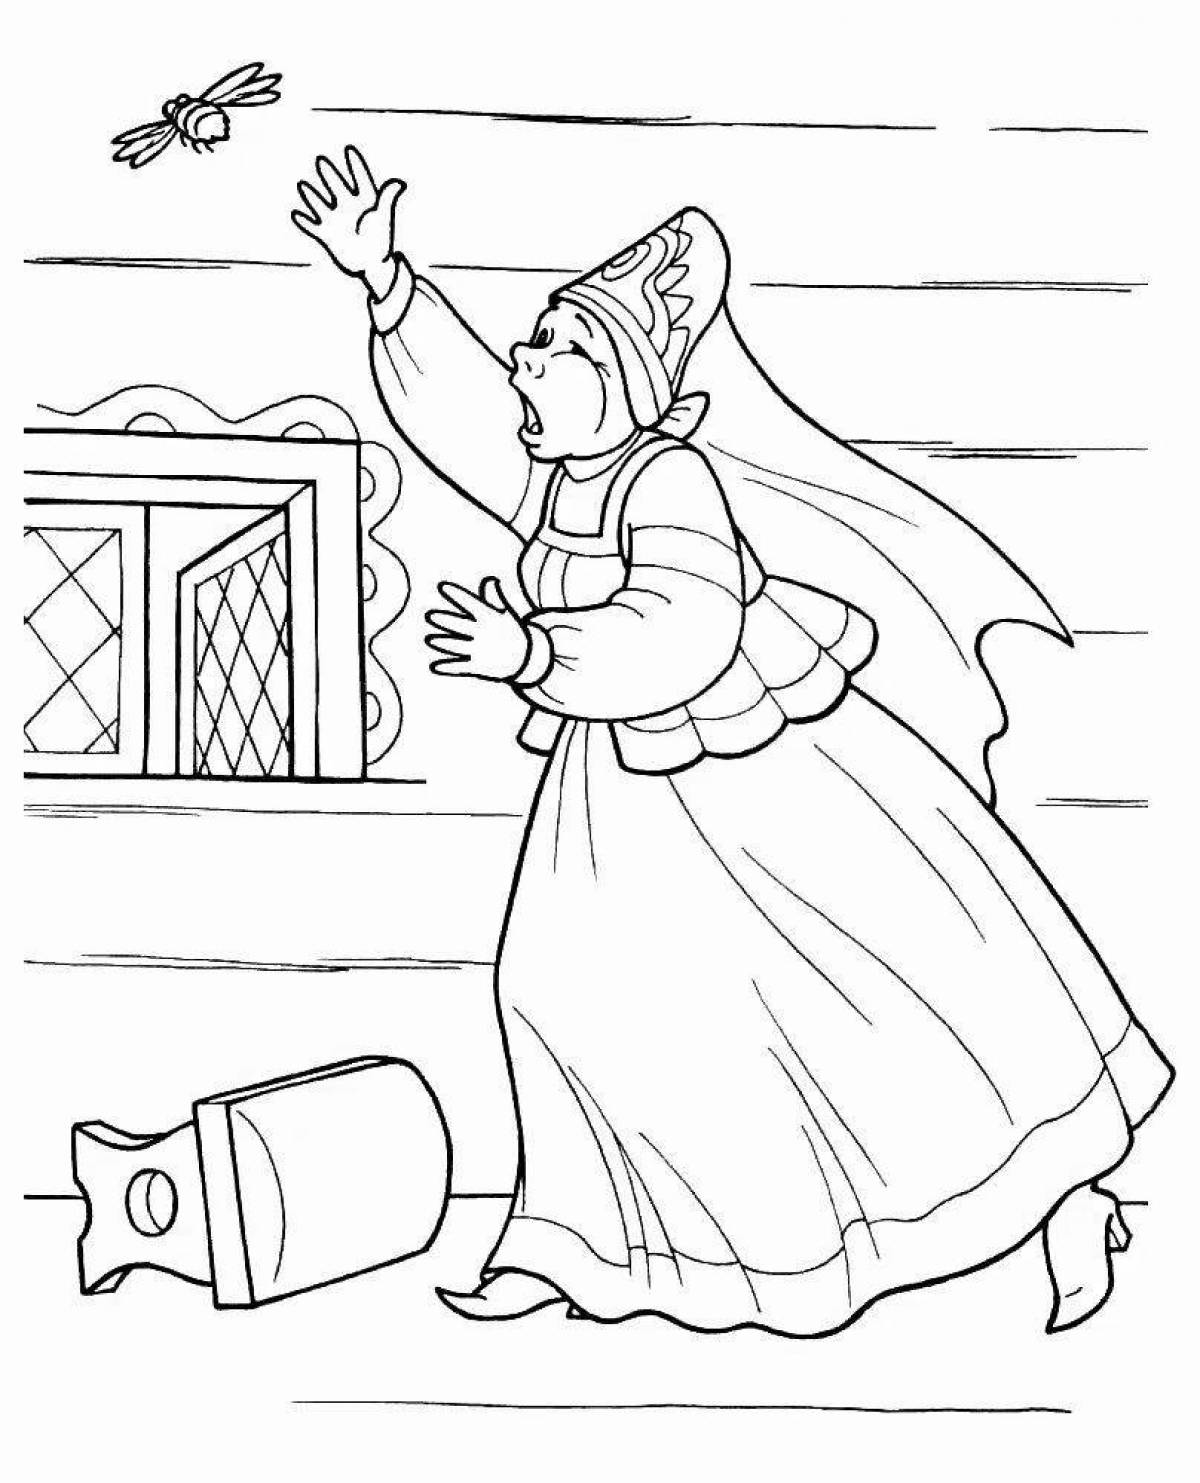 Coloring book magnificent Pushkin's fairy tale about Tsar Saltan